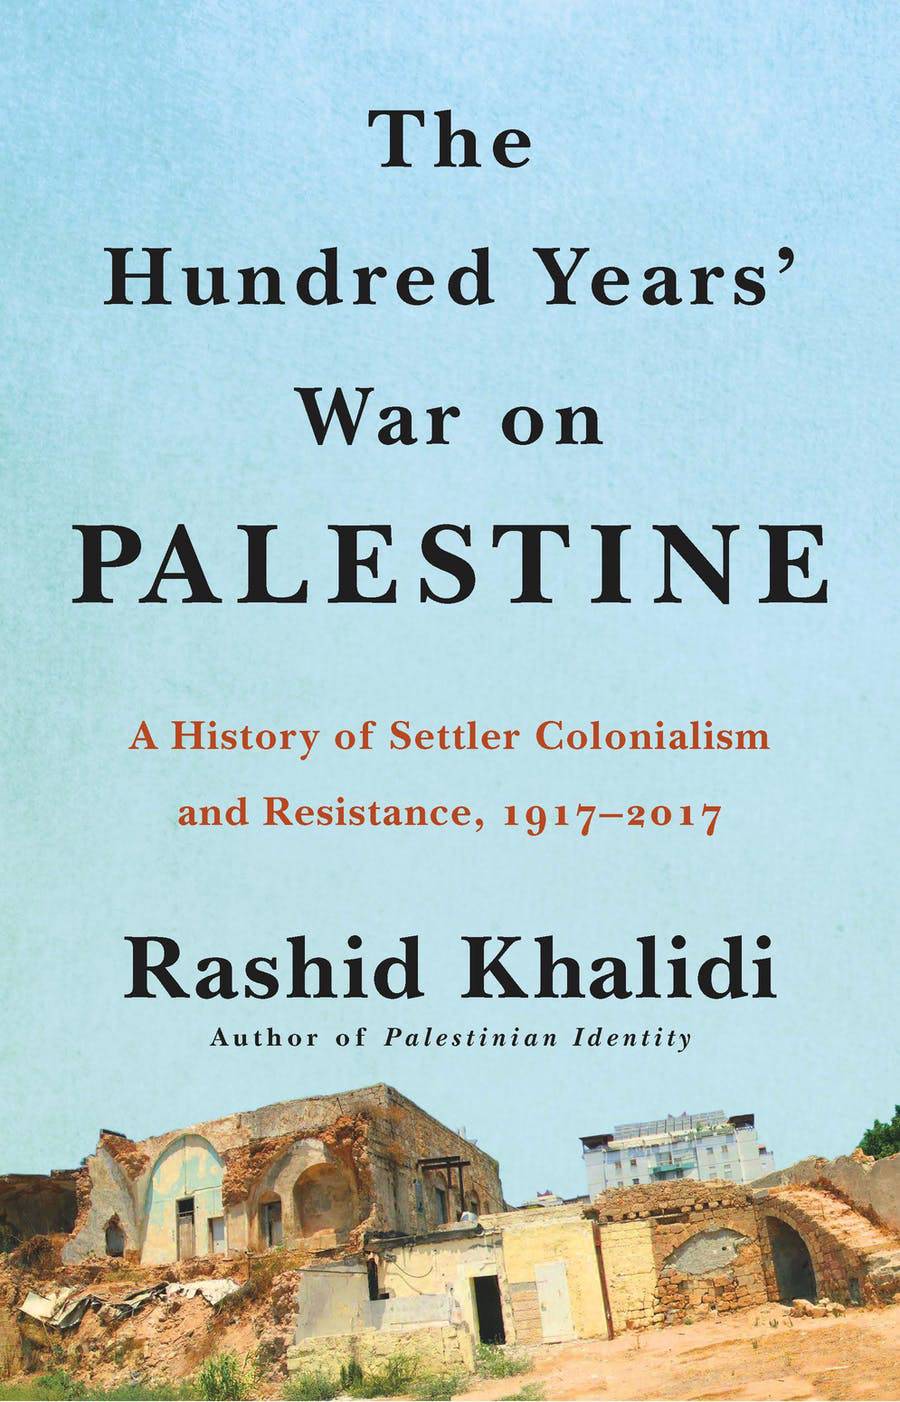 The Hundred Years' War on Palestine: A History of Settler Colonial Conquest and Resistance, 1917-2017